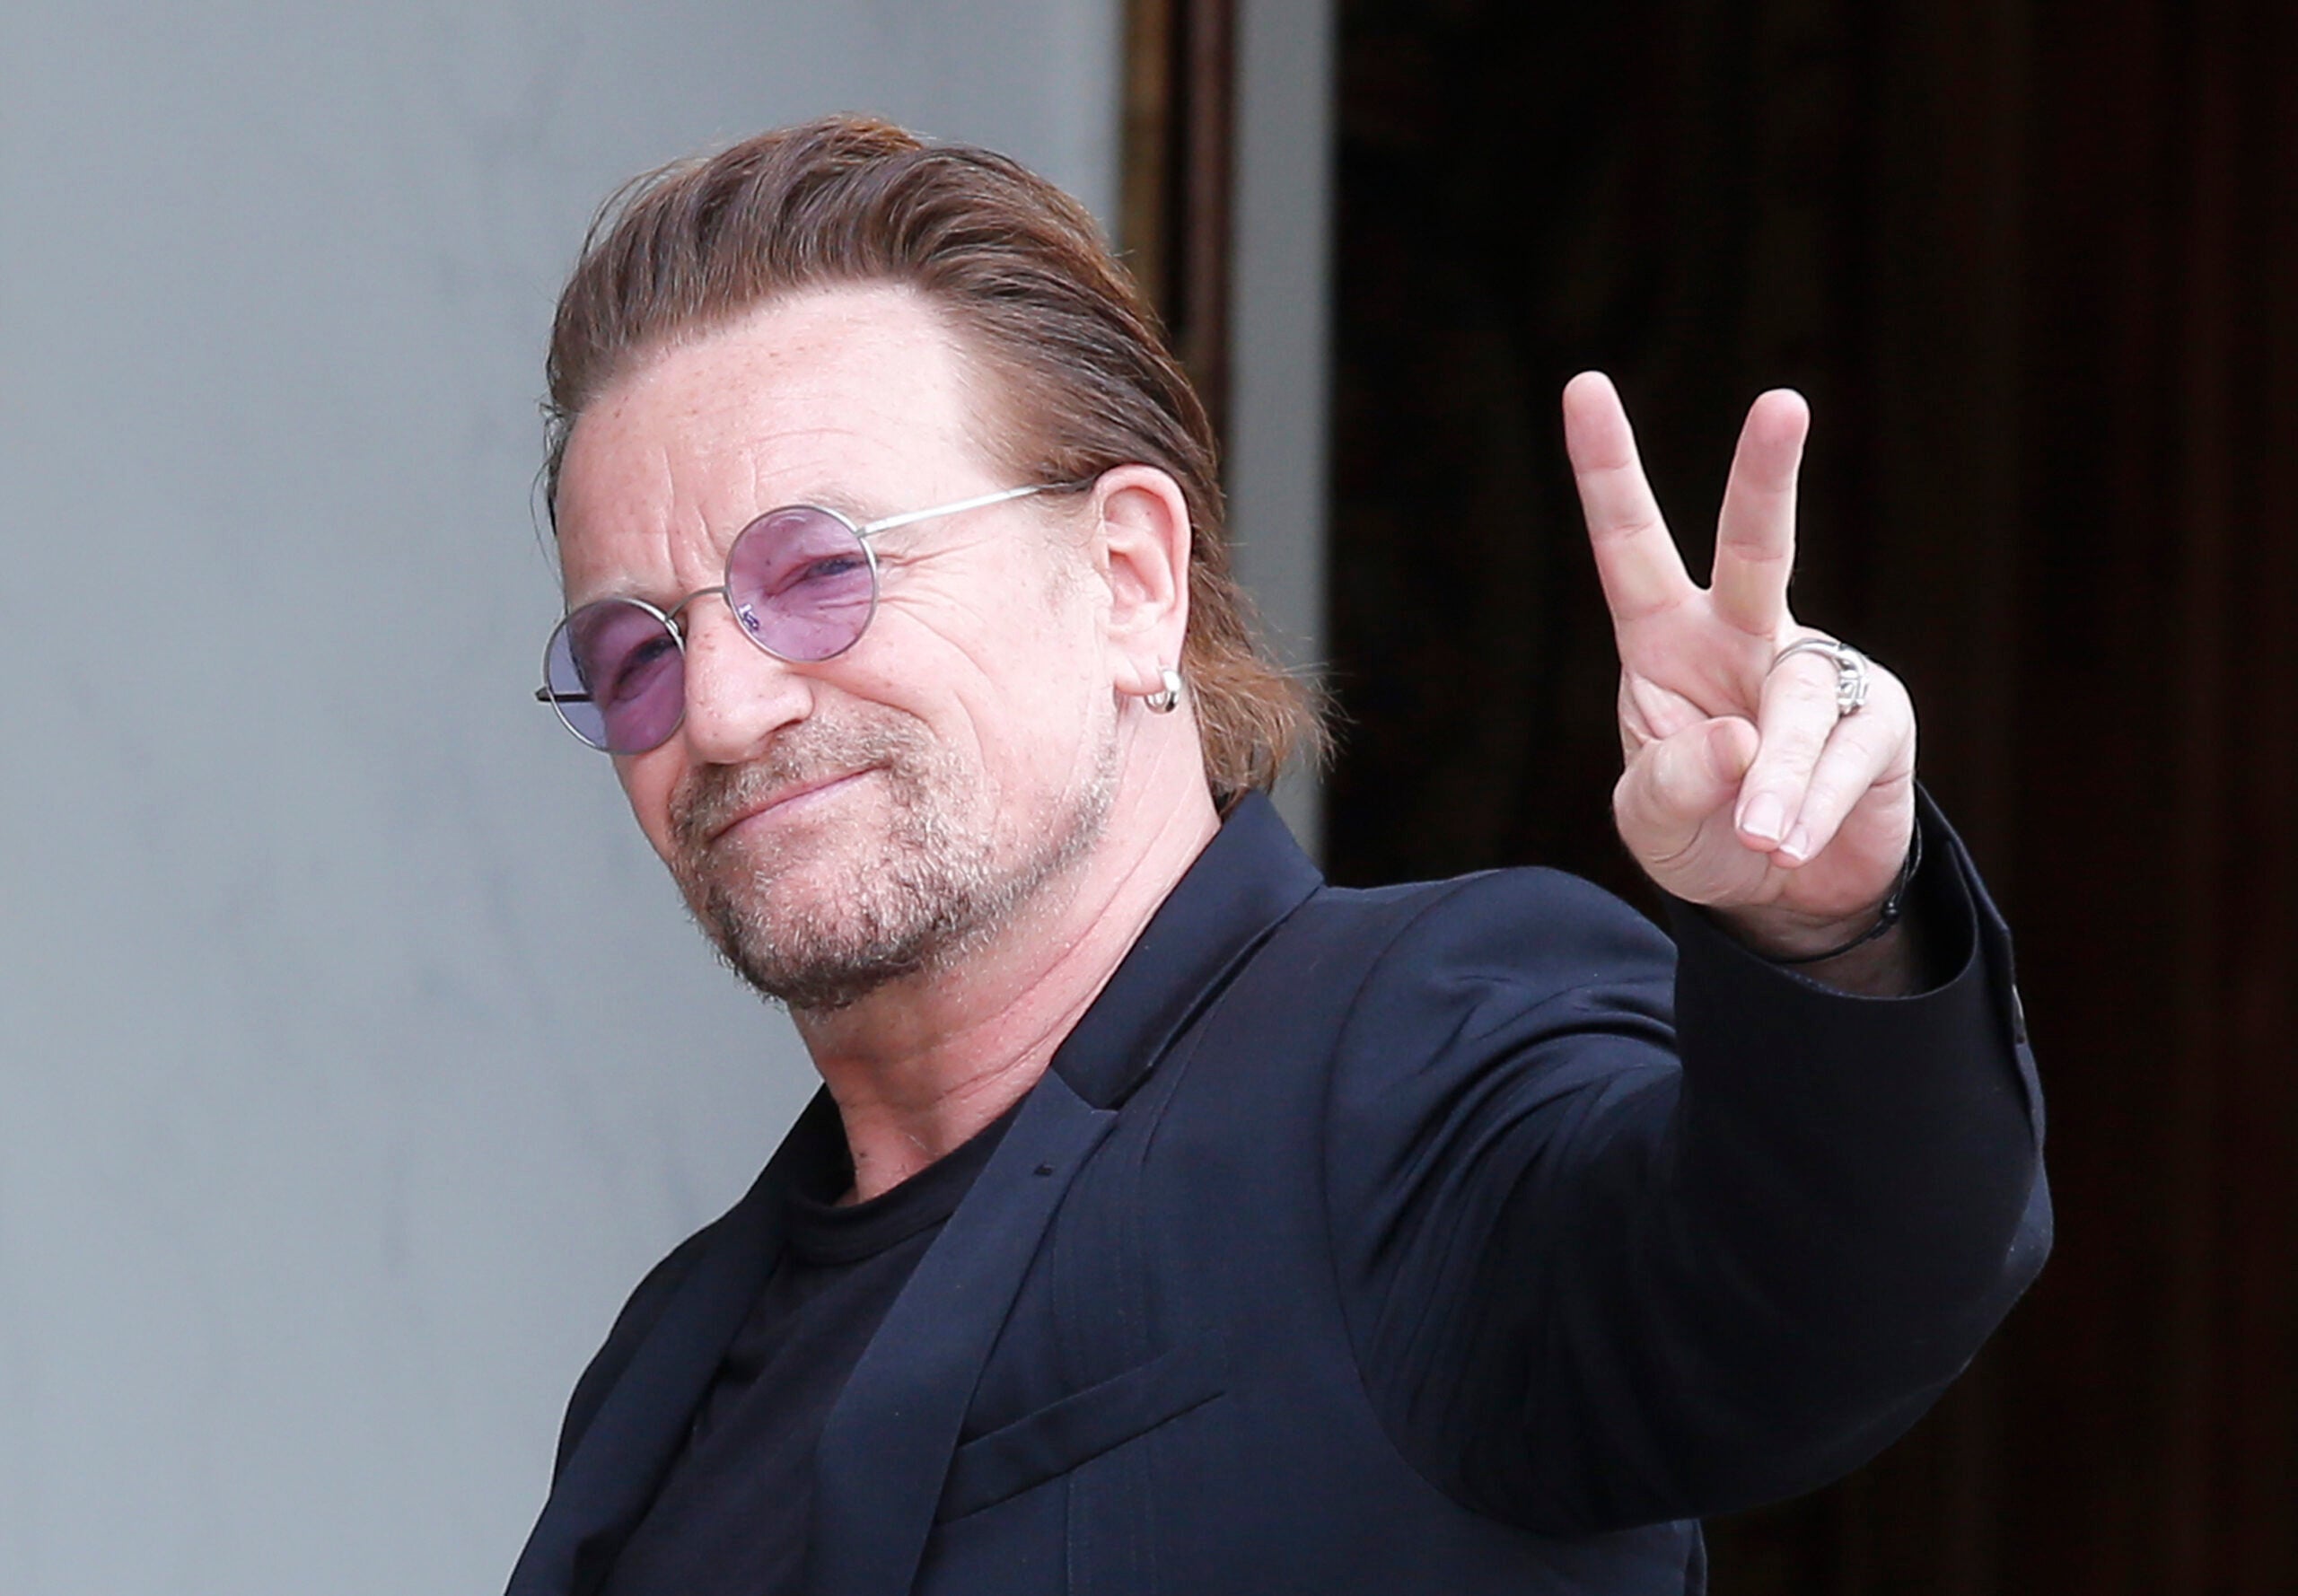 U2 singer Bono makes a peace sign as he arrives for a meeting in Paris.